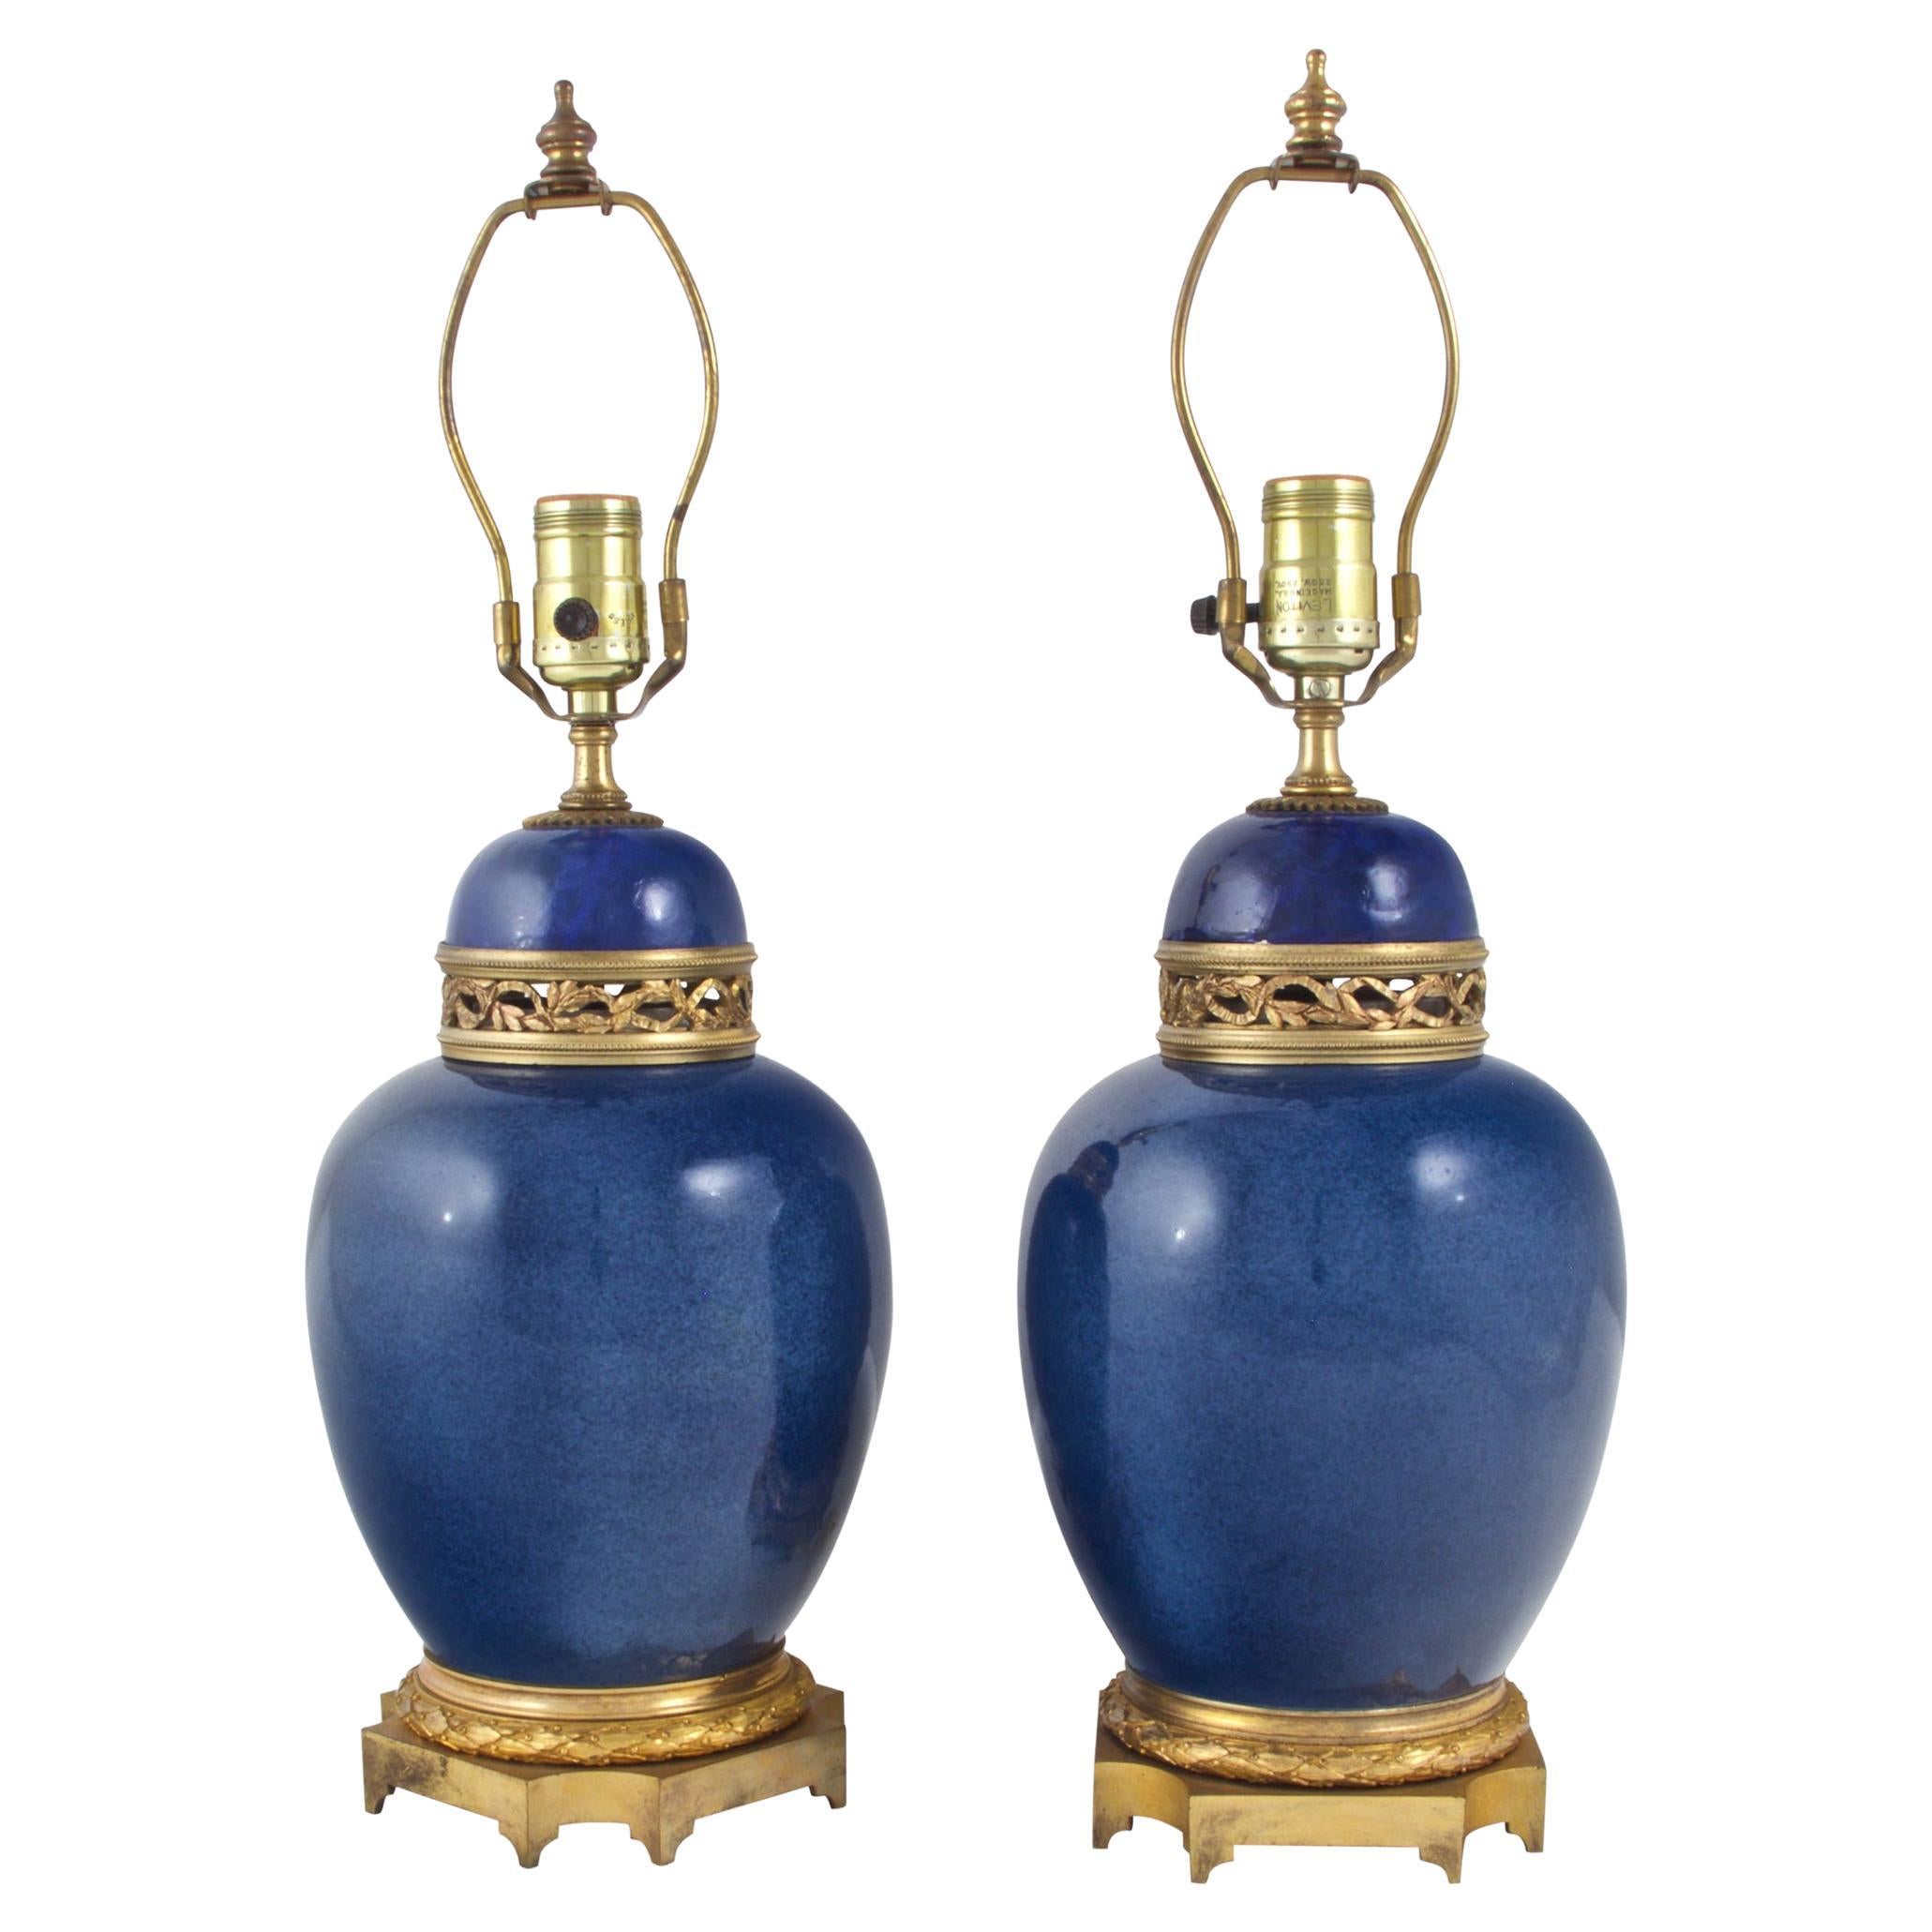  Pair of French Ormolu-Mounted Blue-Ground Porcelain Vases Fitted as Lamps